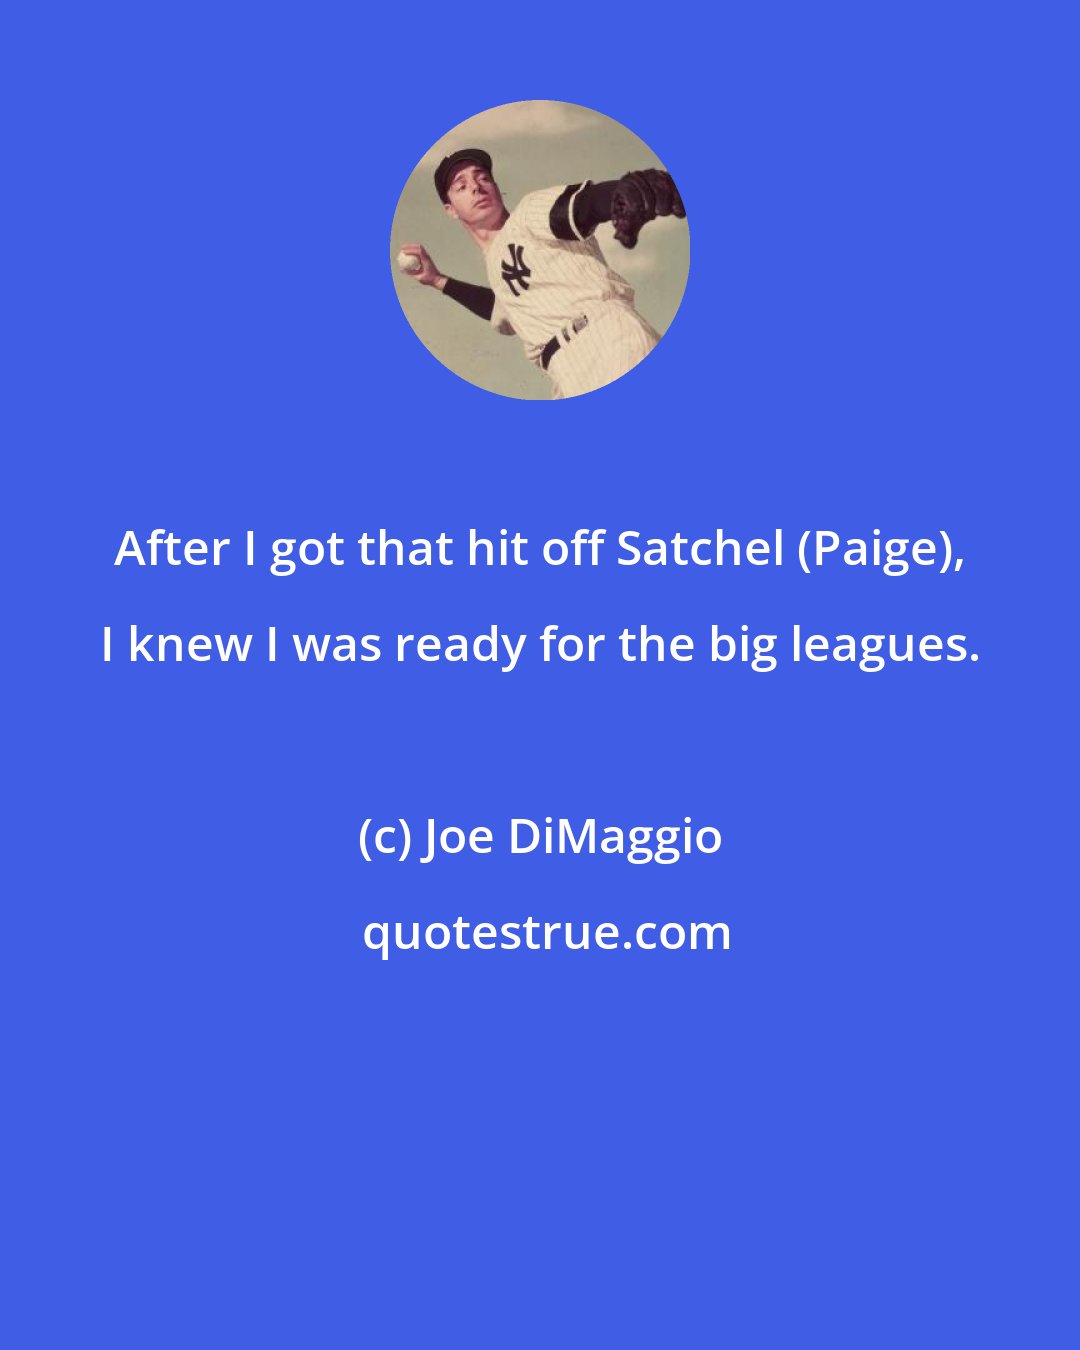 Joe DiMaggio: After I got that hit off Satchel (Paige), I knew I was ready for the big leagues.